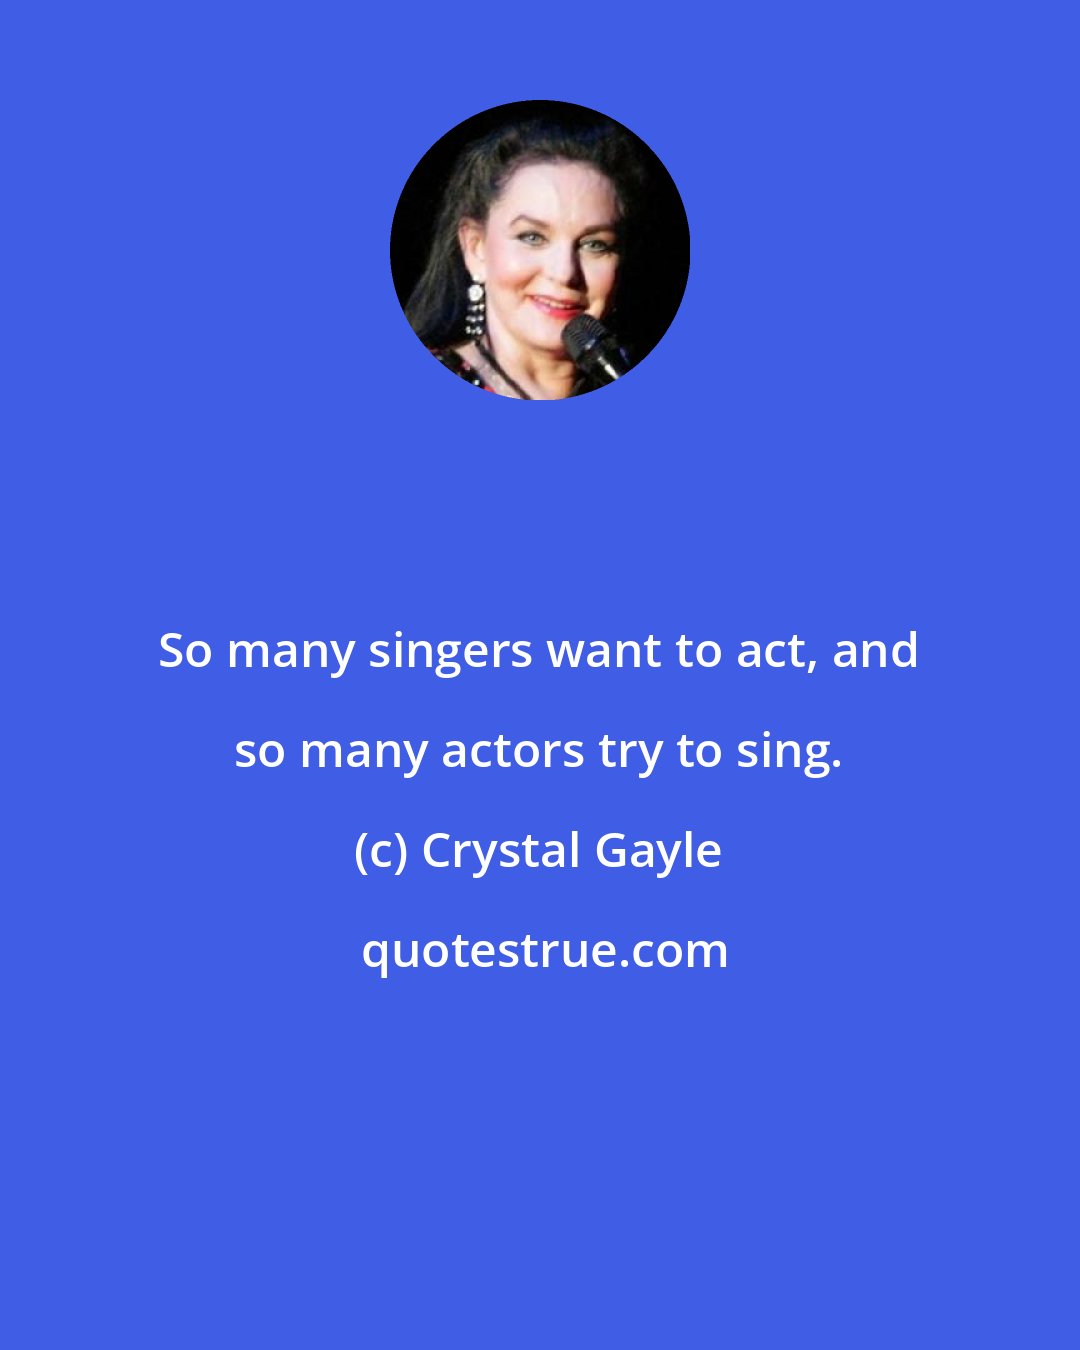 Crystal Gayle: So many singers want to act, and so many actors try to sing.